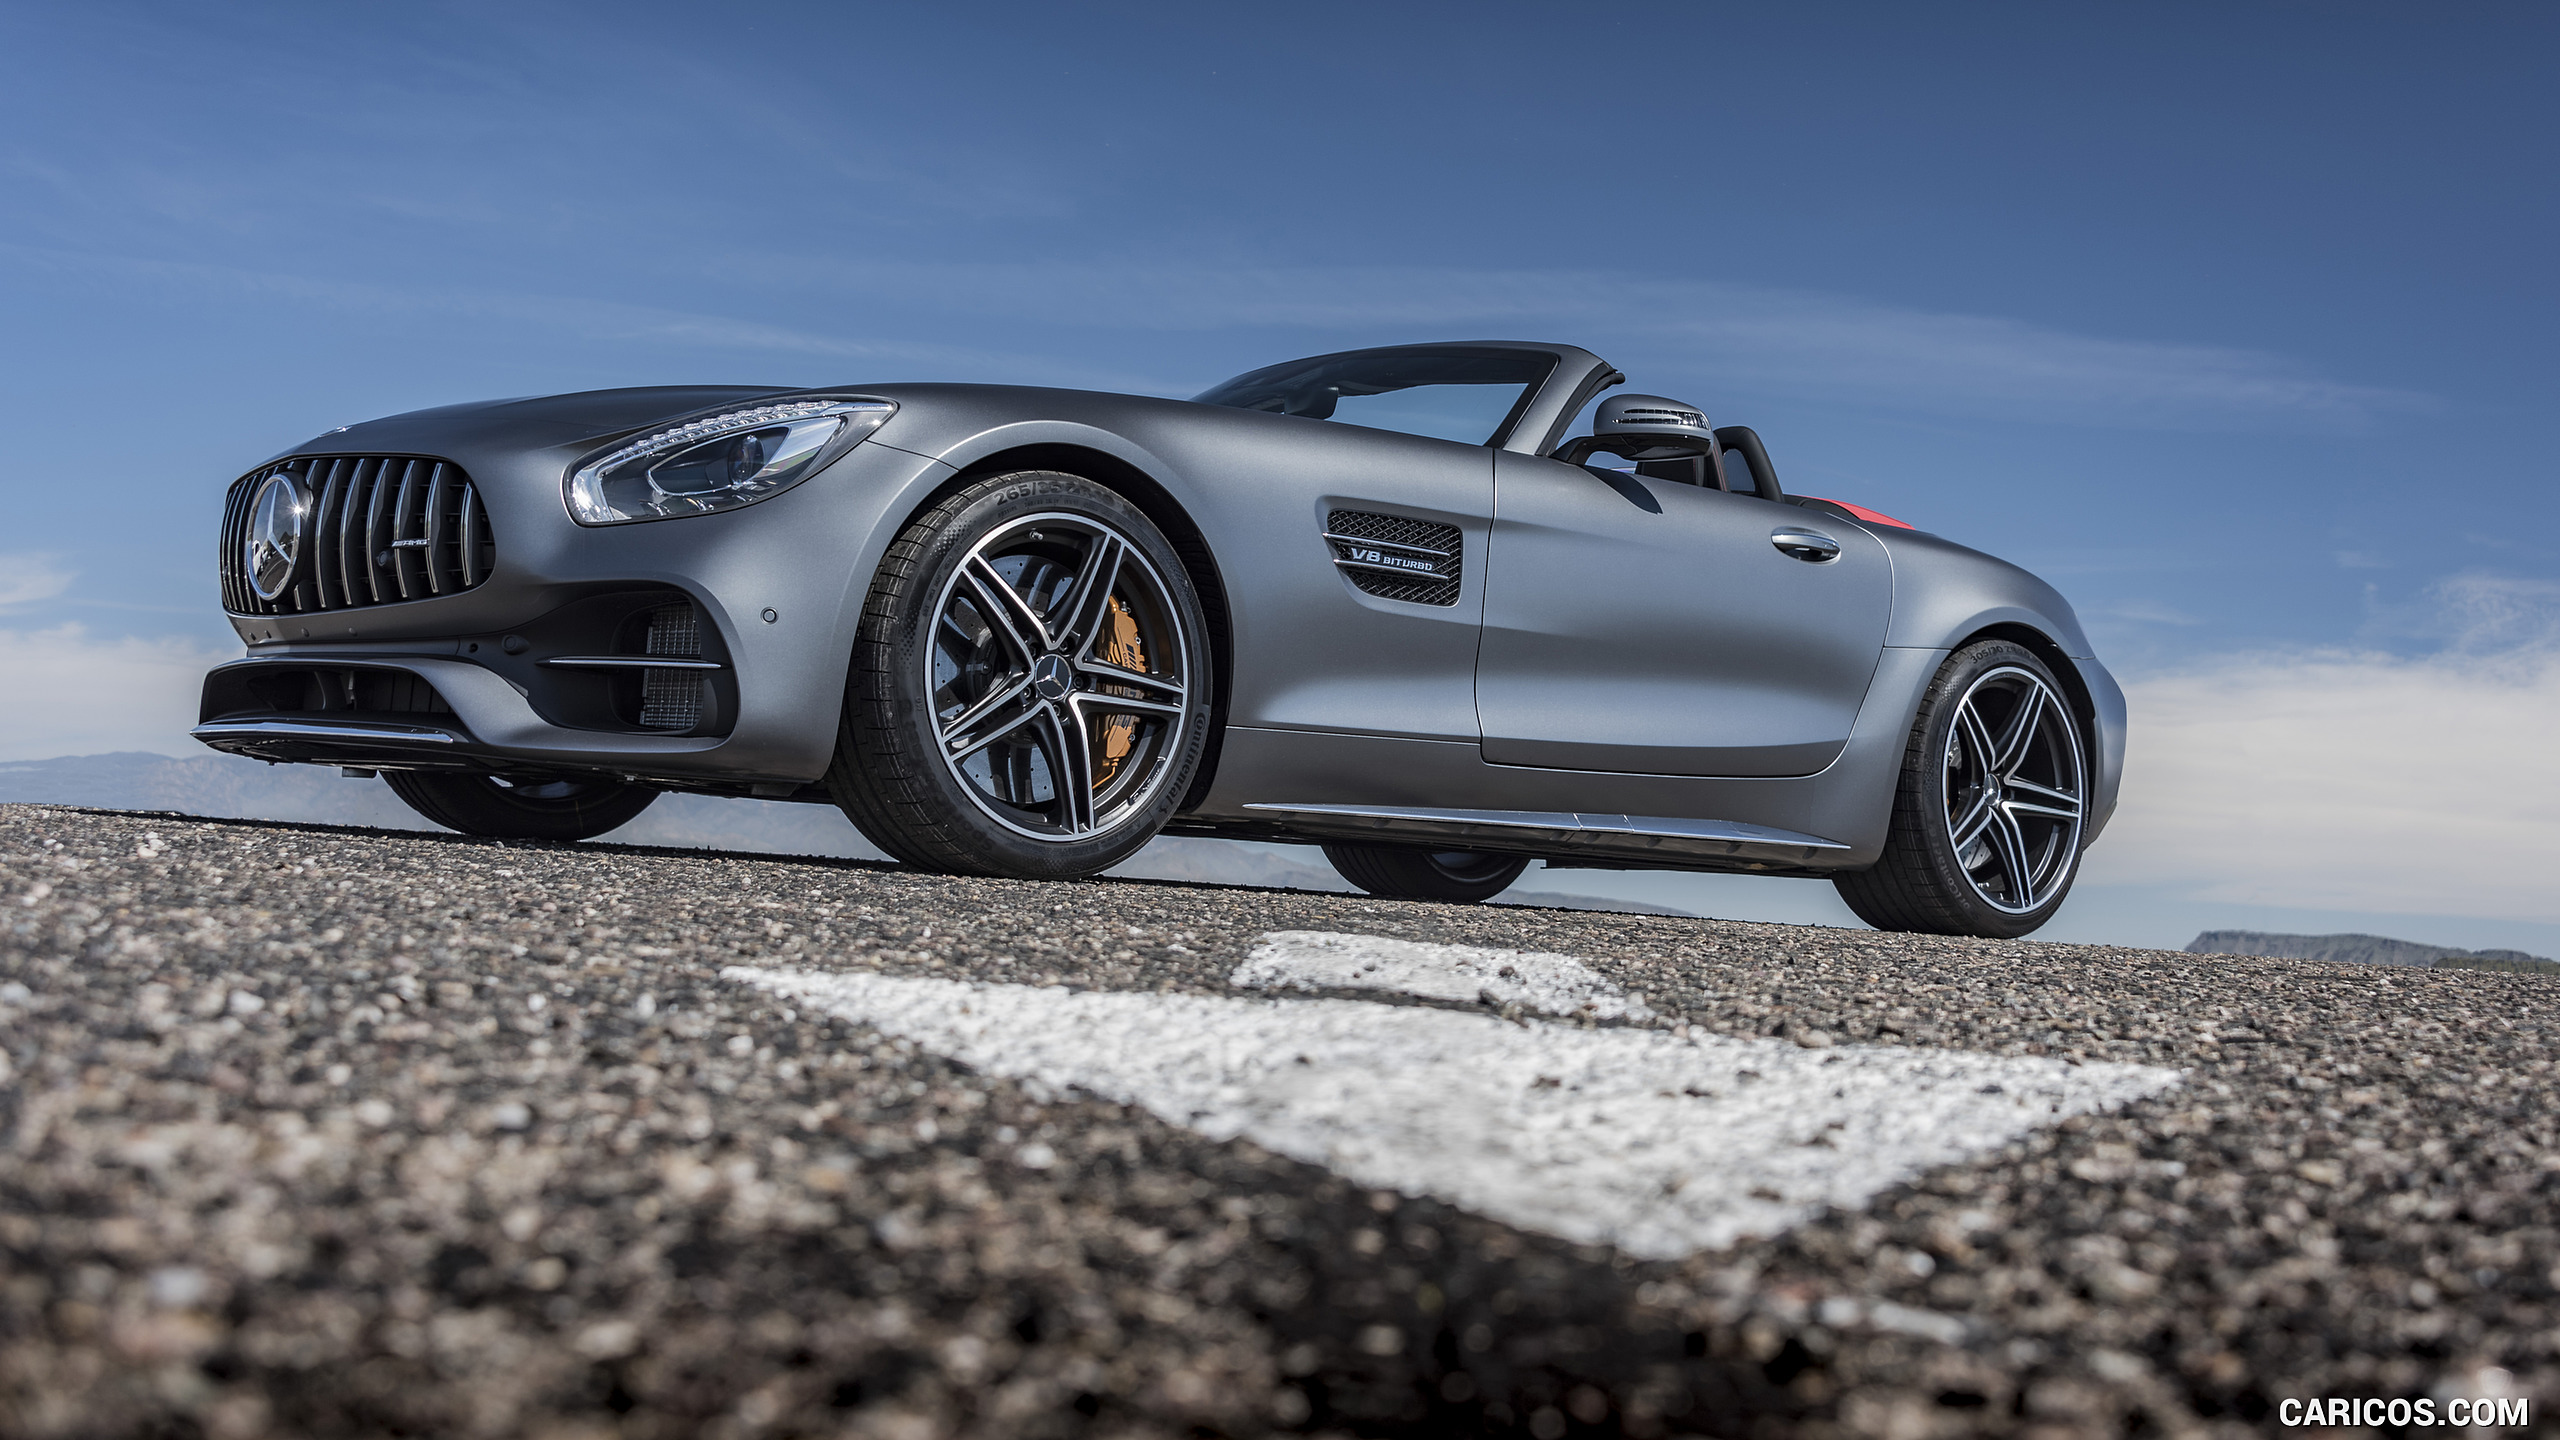 2018 Mercedes-AMG GT C Roadster - Front Three-Quarter, #308 of 350